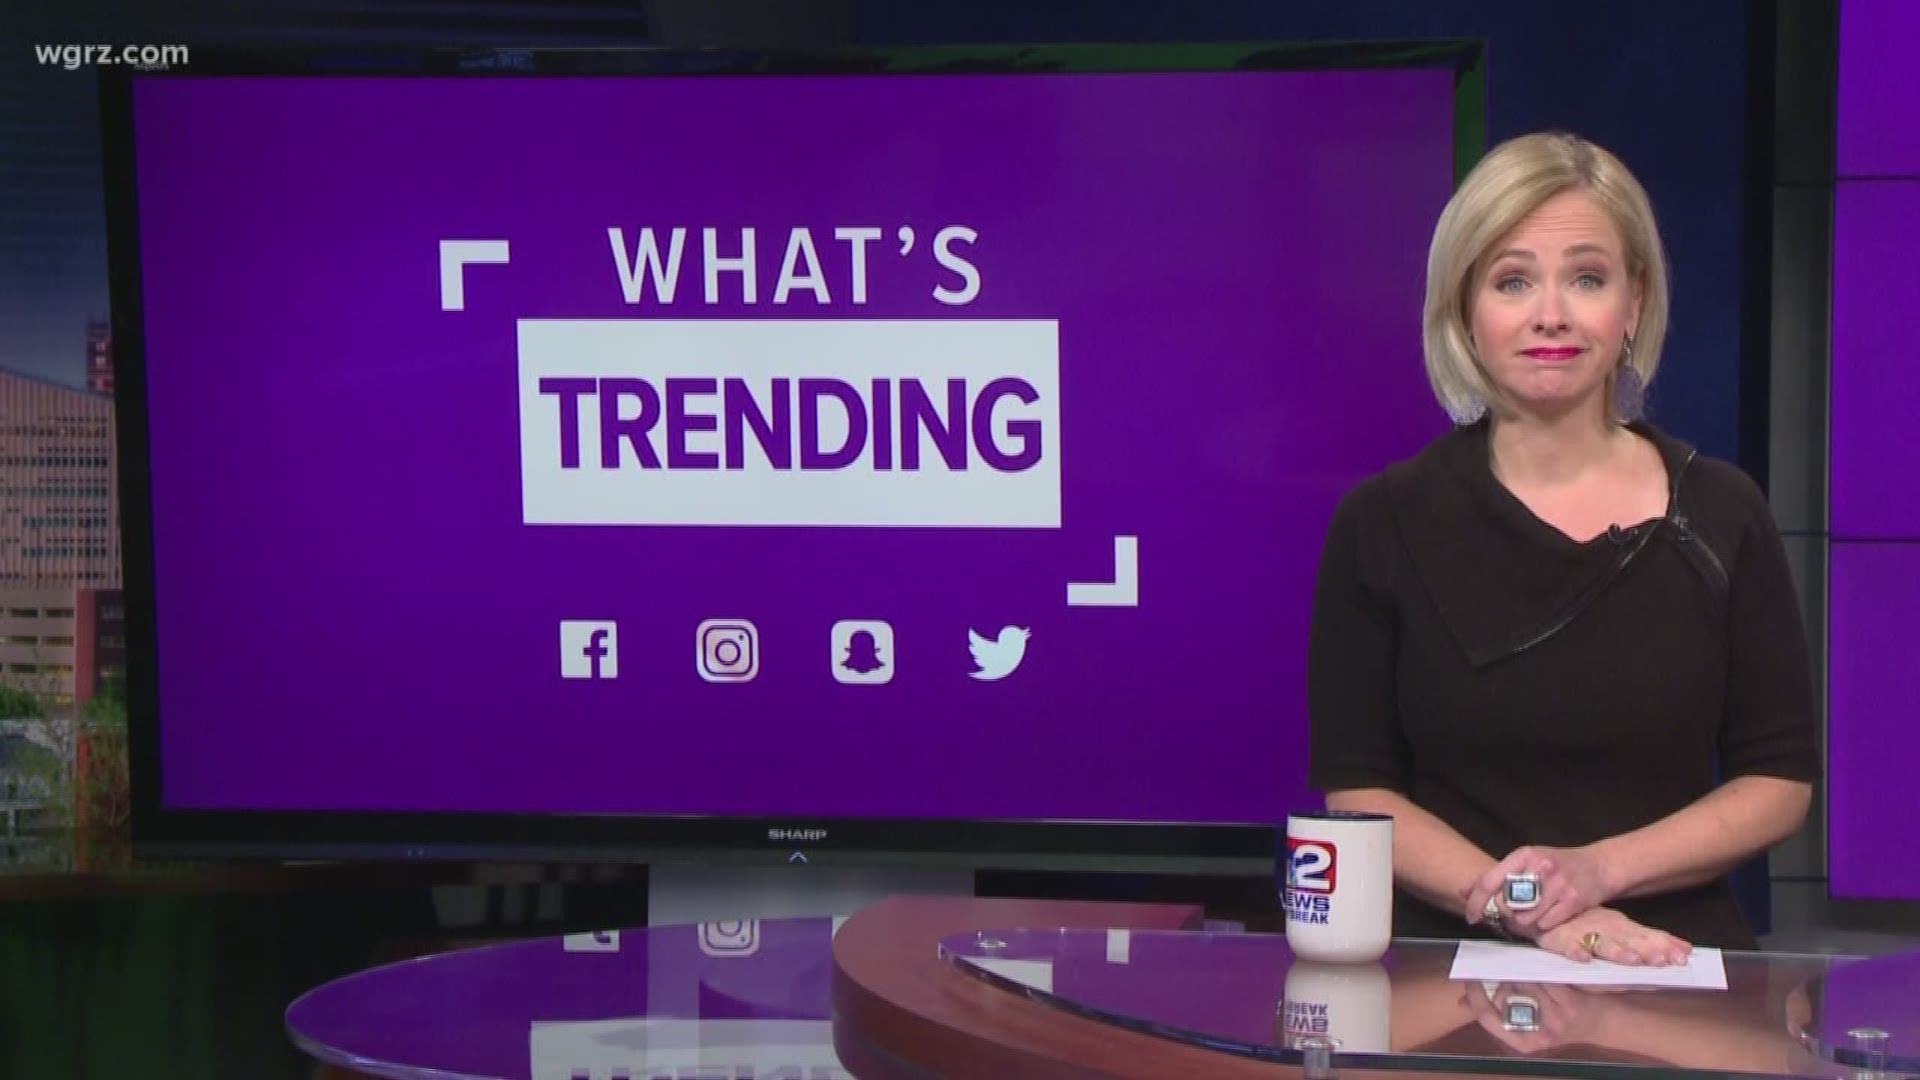 Beer. Cheese. Syrup. 
Breakfast of Champions.
What's Trending for Wednesday, October 17, 2018.